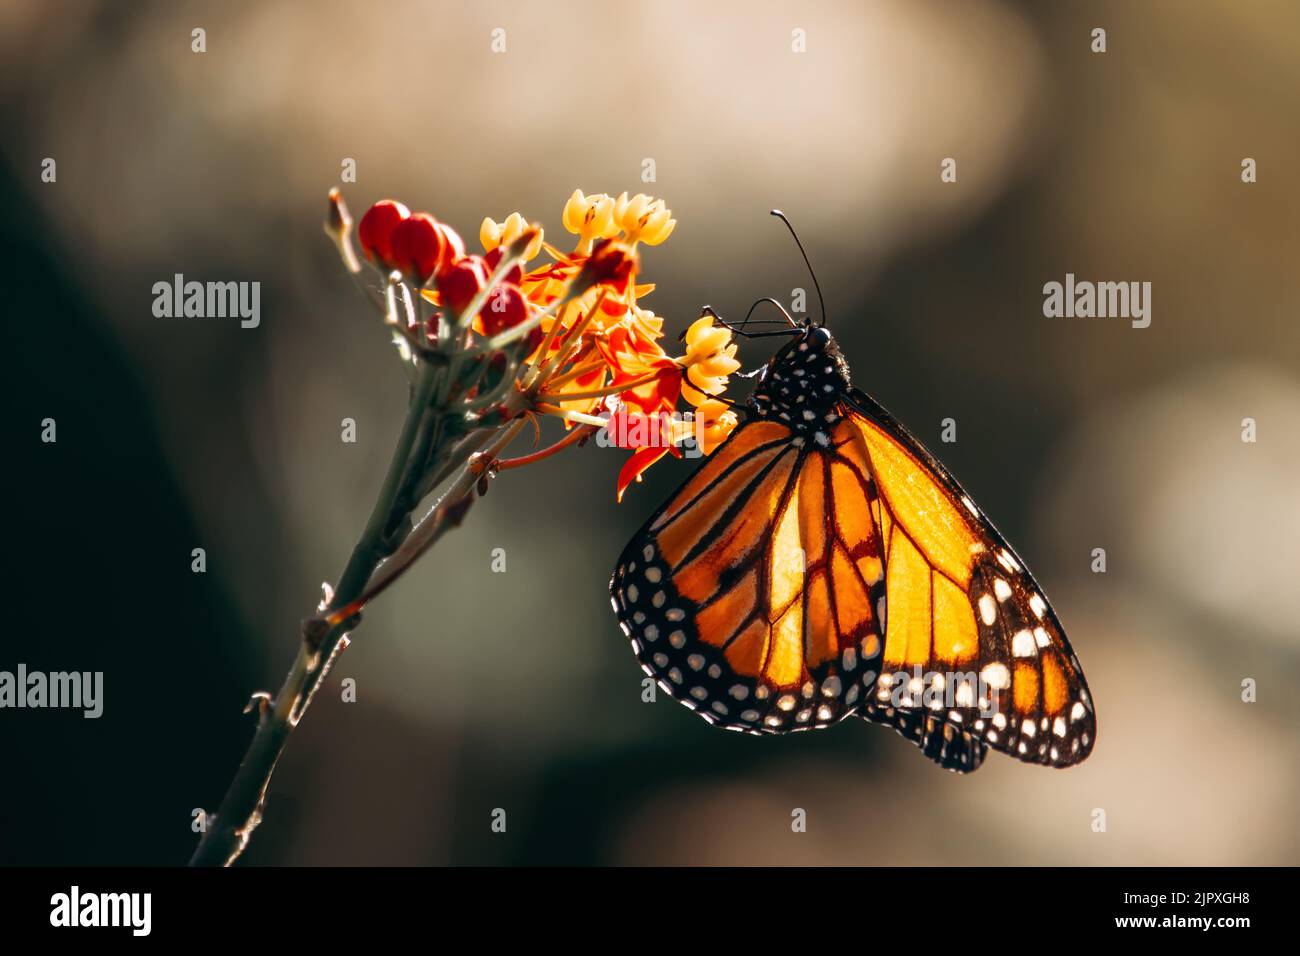 Portrait of a monarch butterfly landed on a flower seen from the side Stock Photo